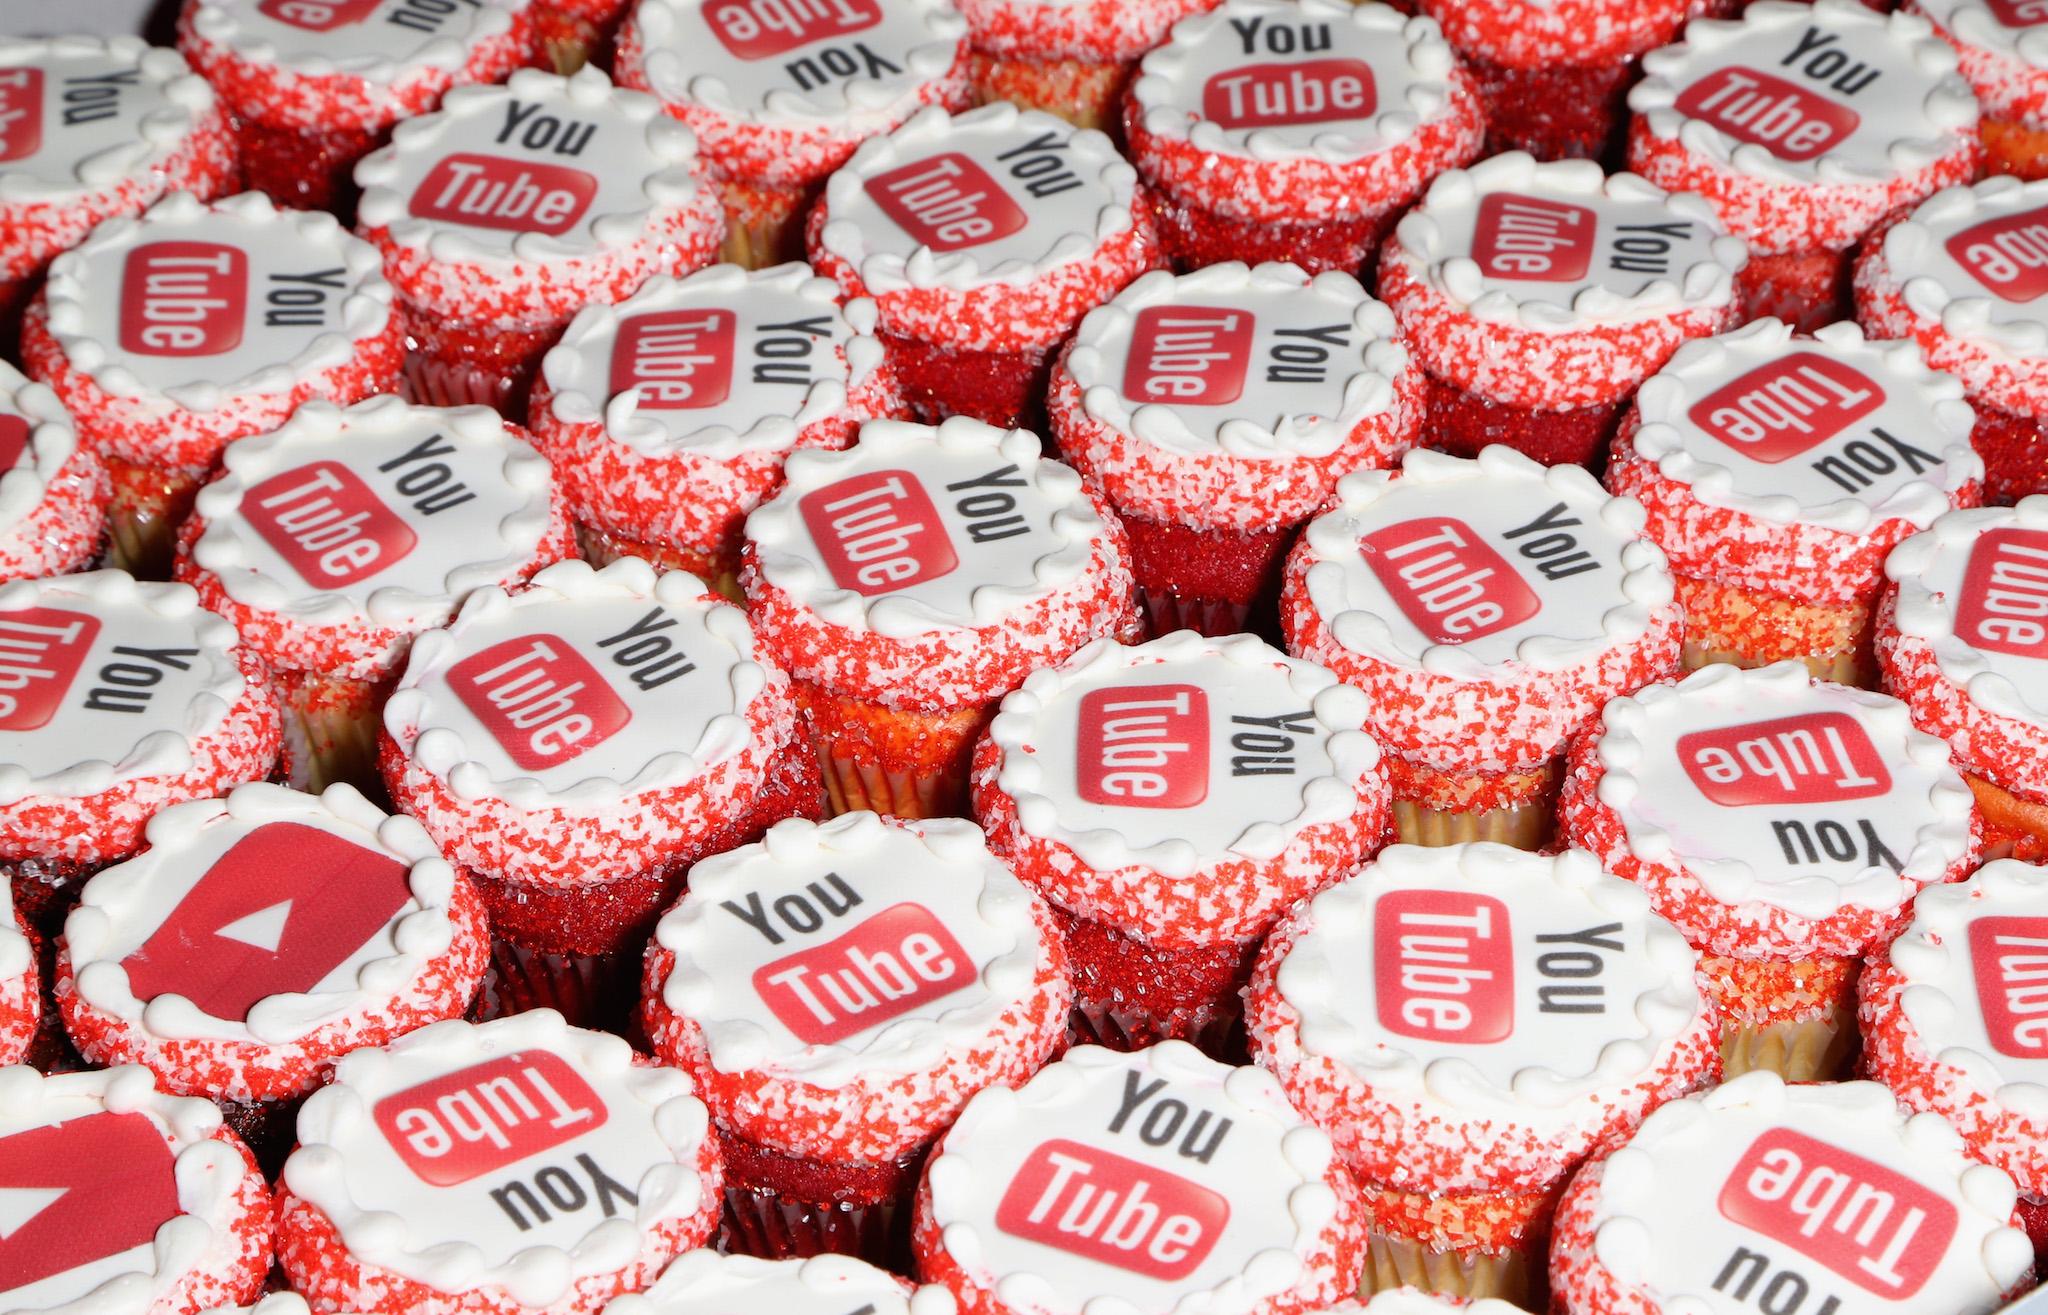 YouTube themed cupcakes are displayed during Murray SawChuck's 100,000 YouTube subscriber party at Planet Hollywood Resort